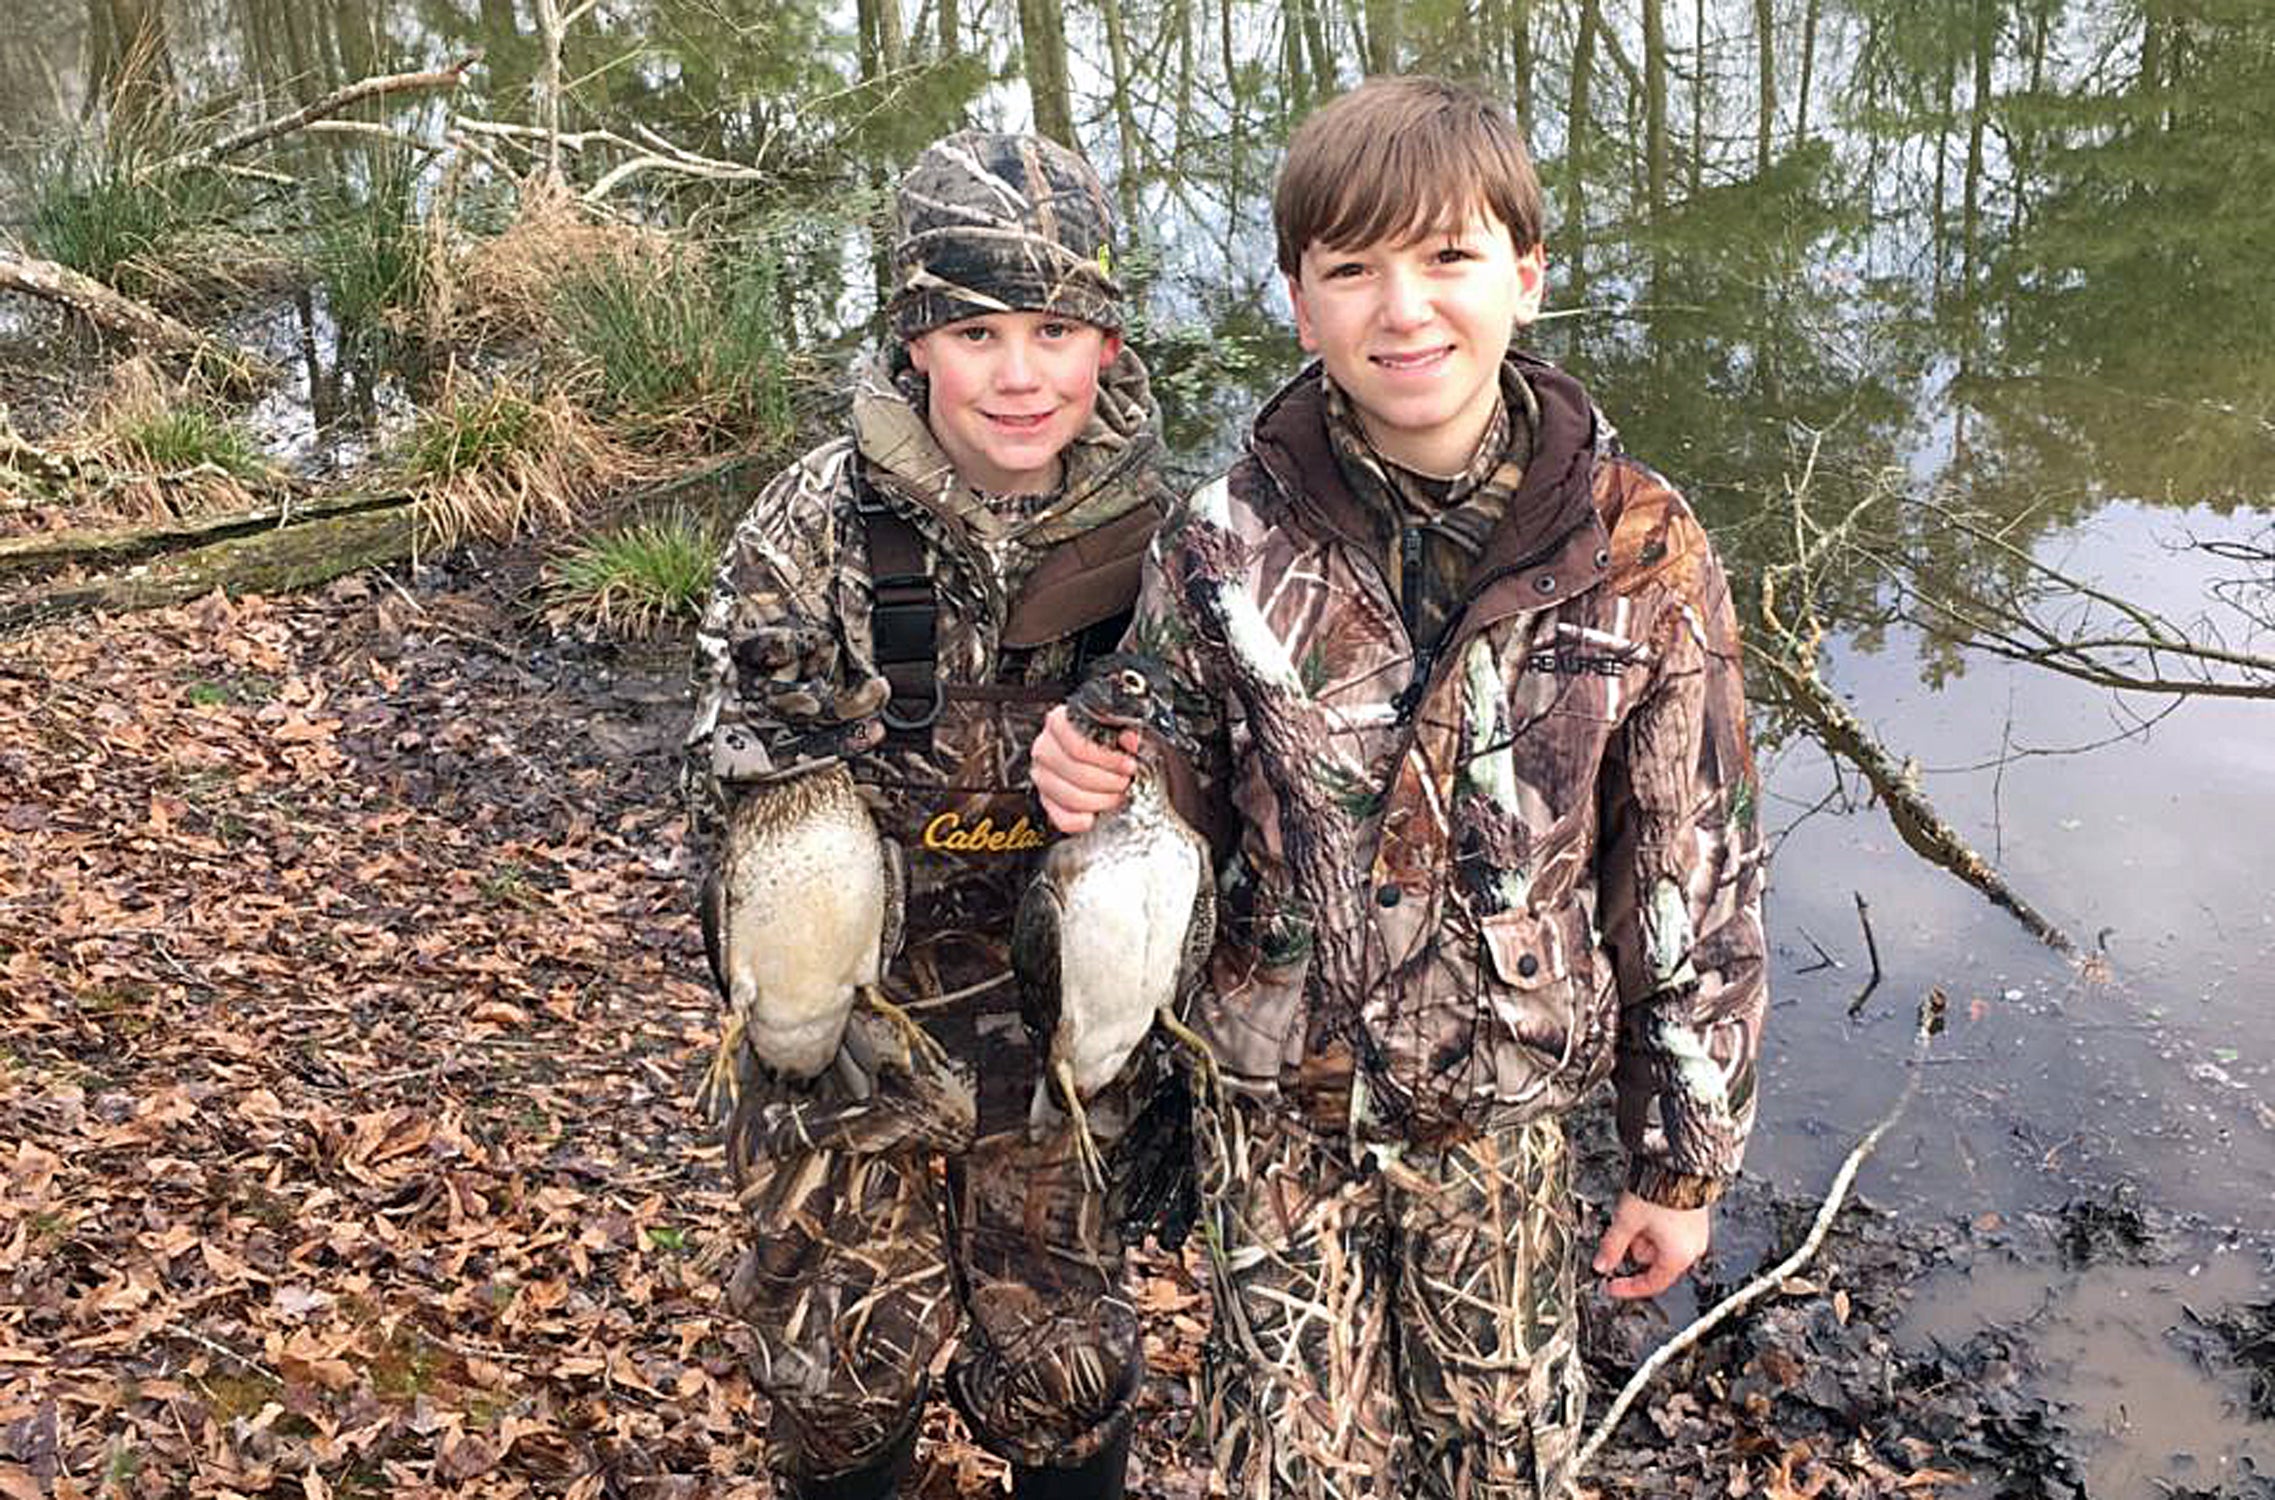 Special Waterfowl Hunting Days for Youth, Veterans and Active Military Personnel for 2022-2023